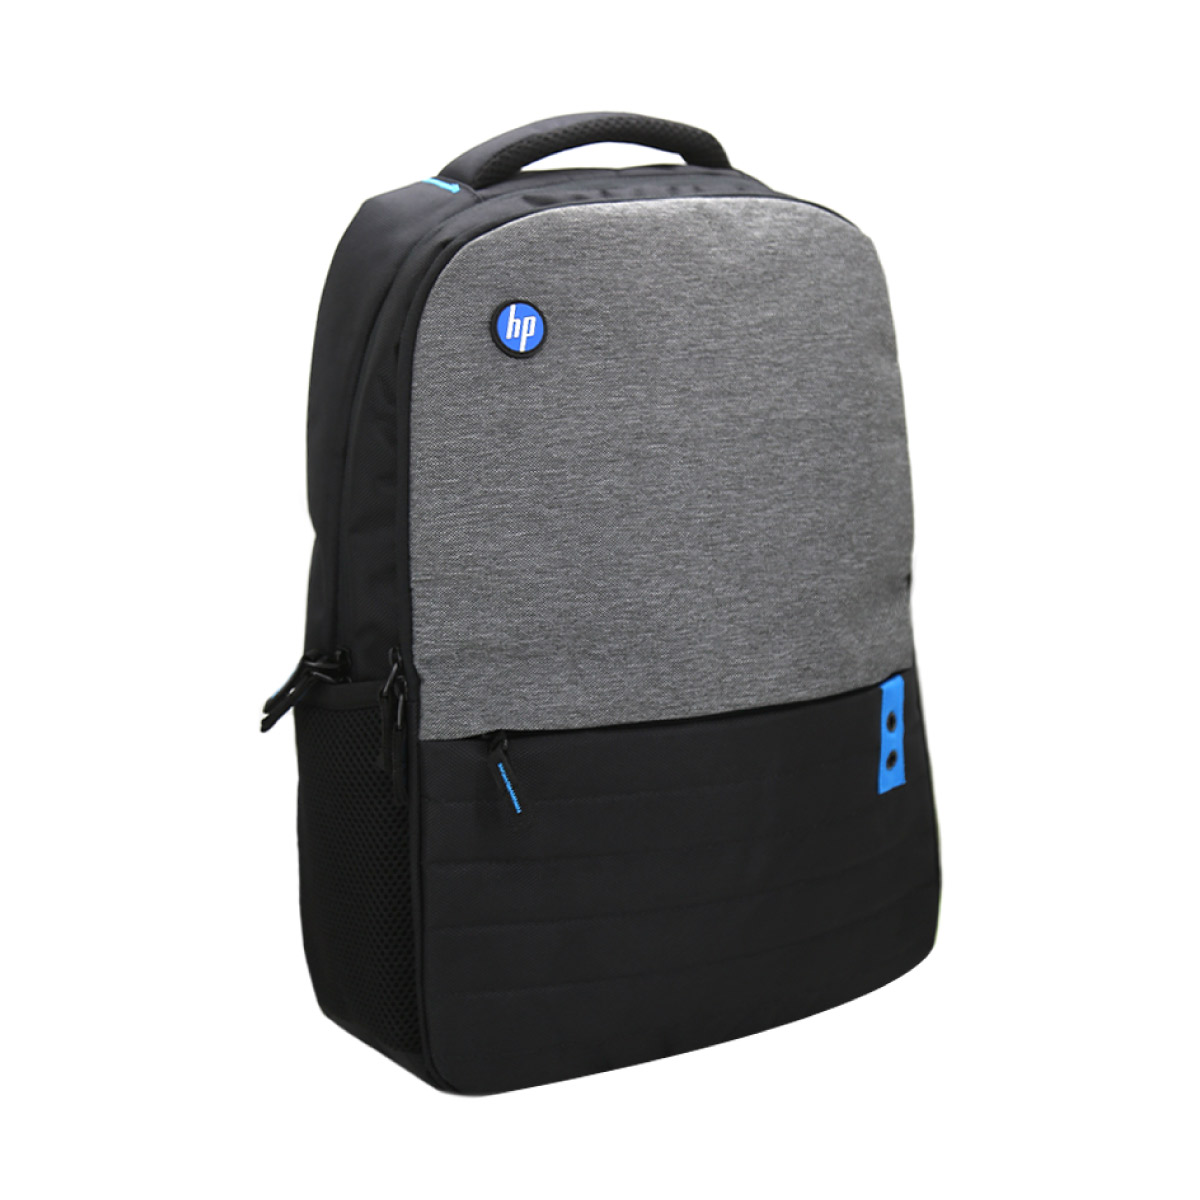 Update 74+ hp laptop bags india best - in.cdgdbentre